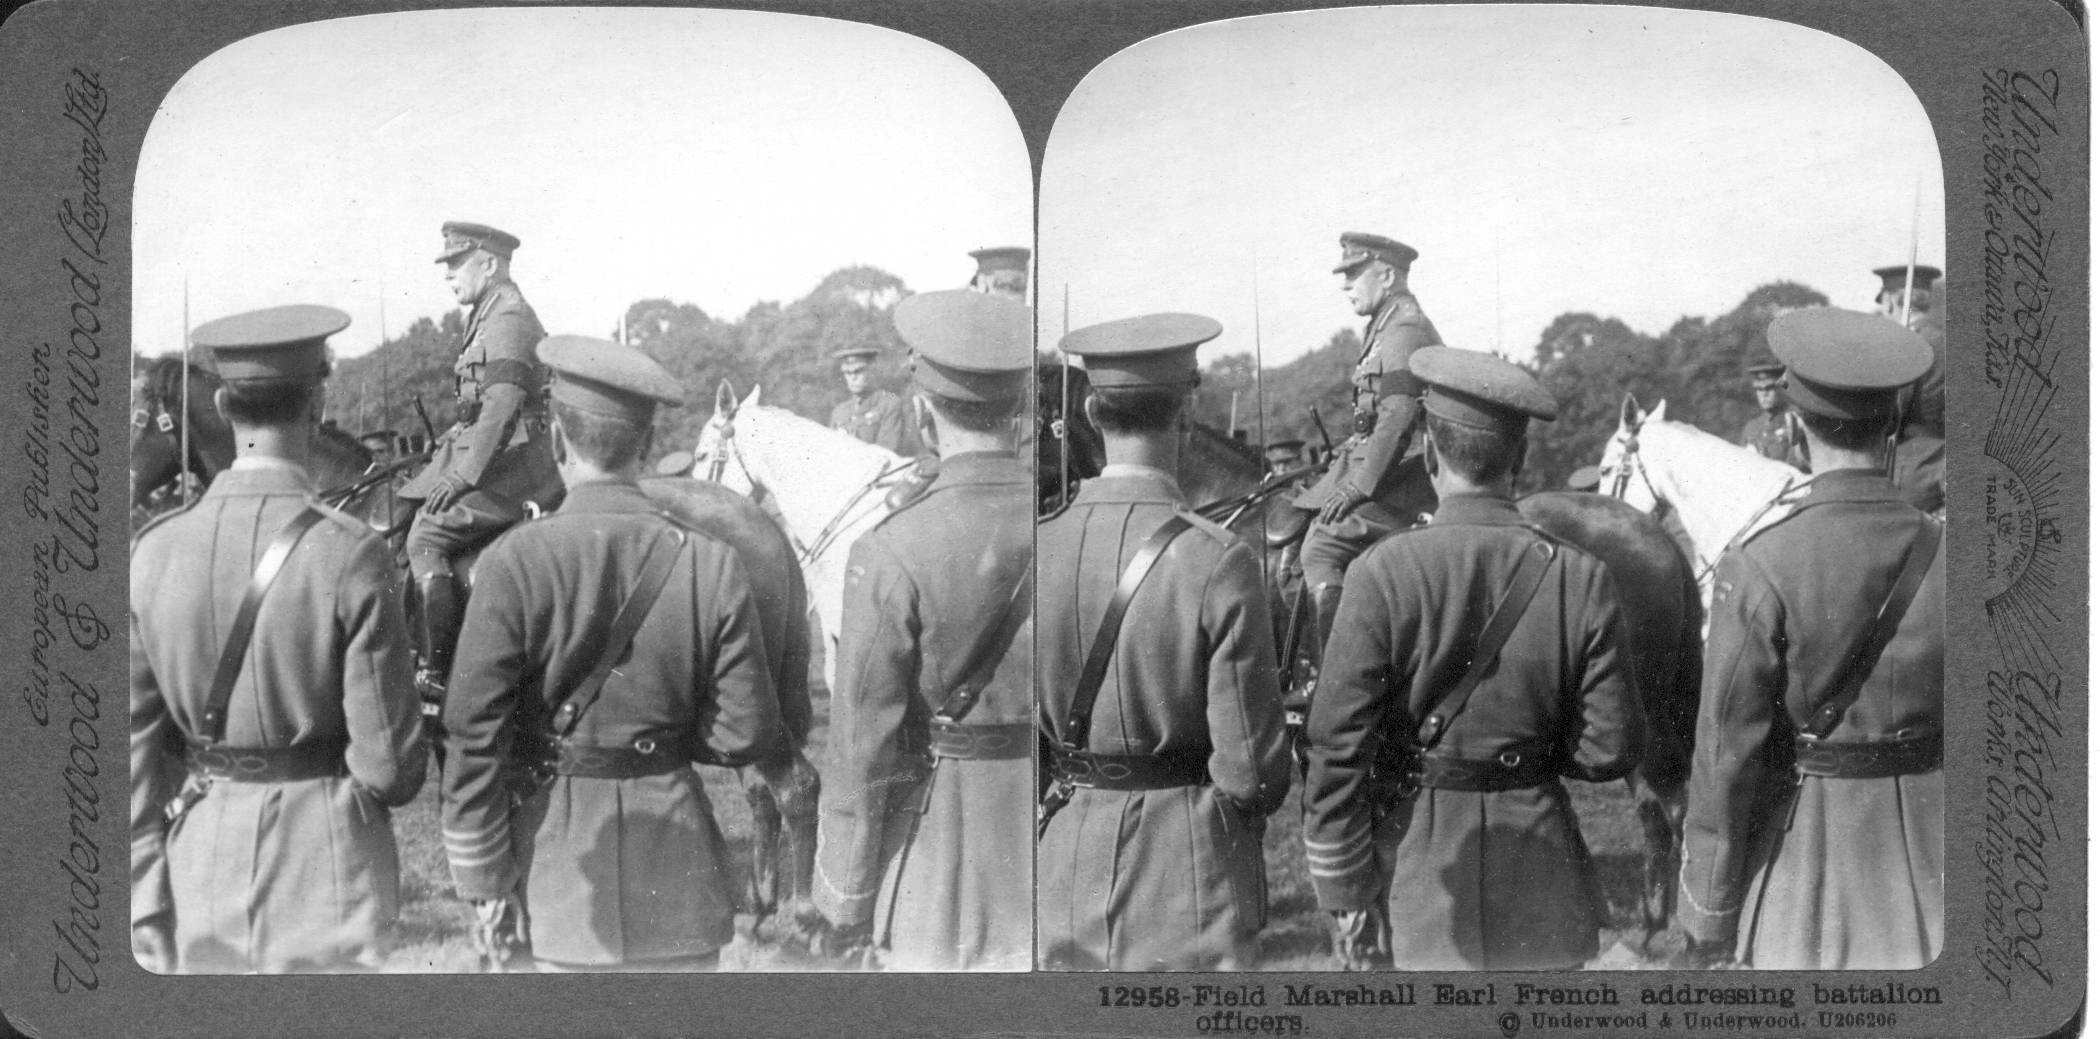 Field Marshal Earl French addressing battalion officers